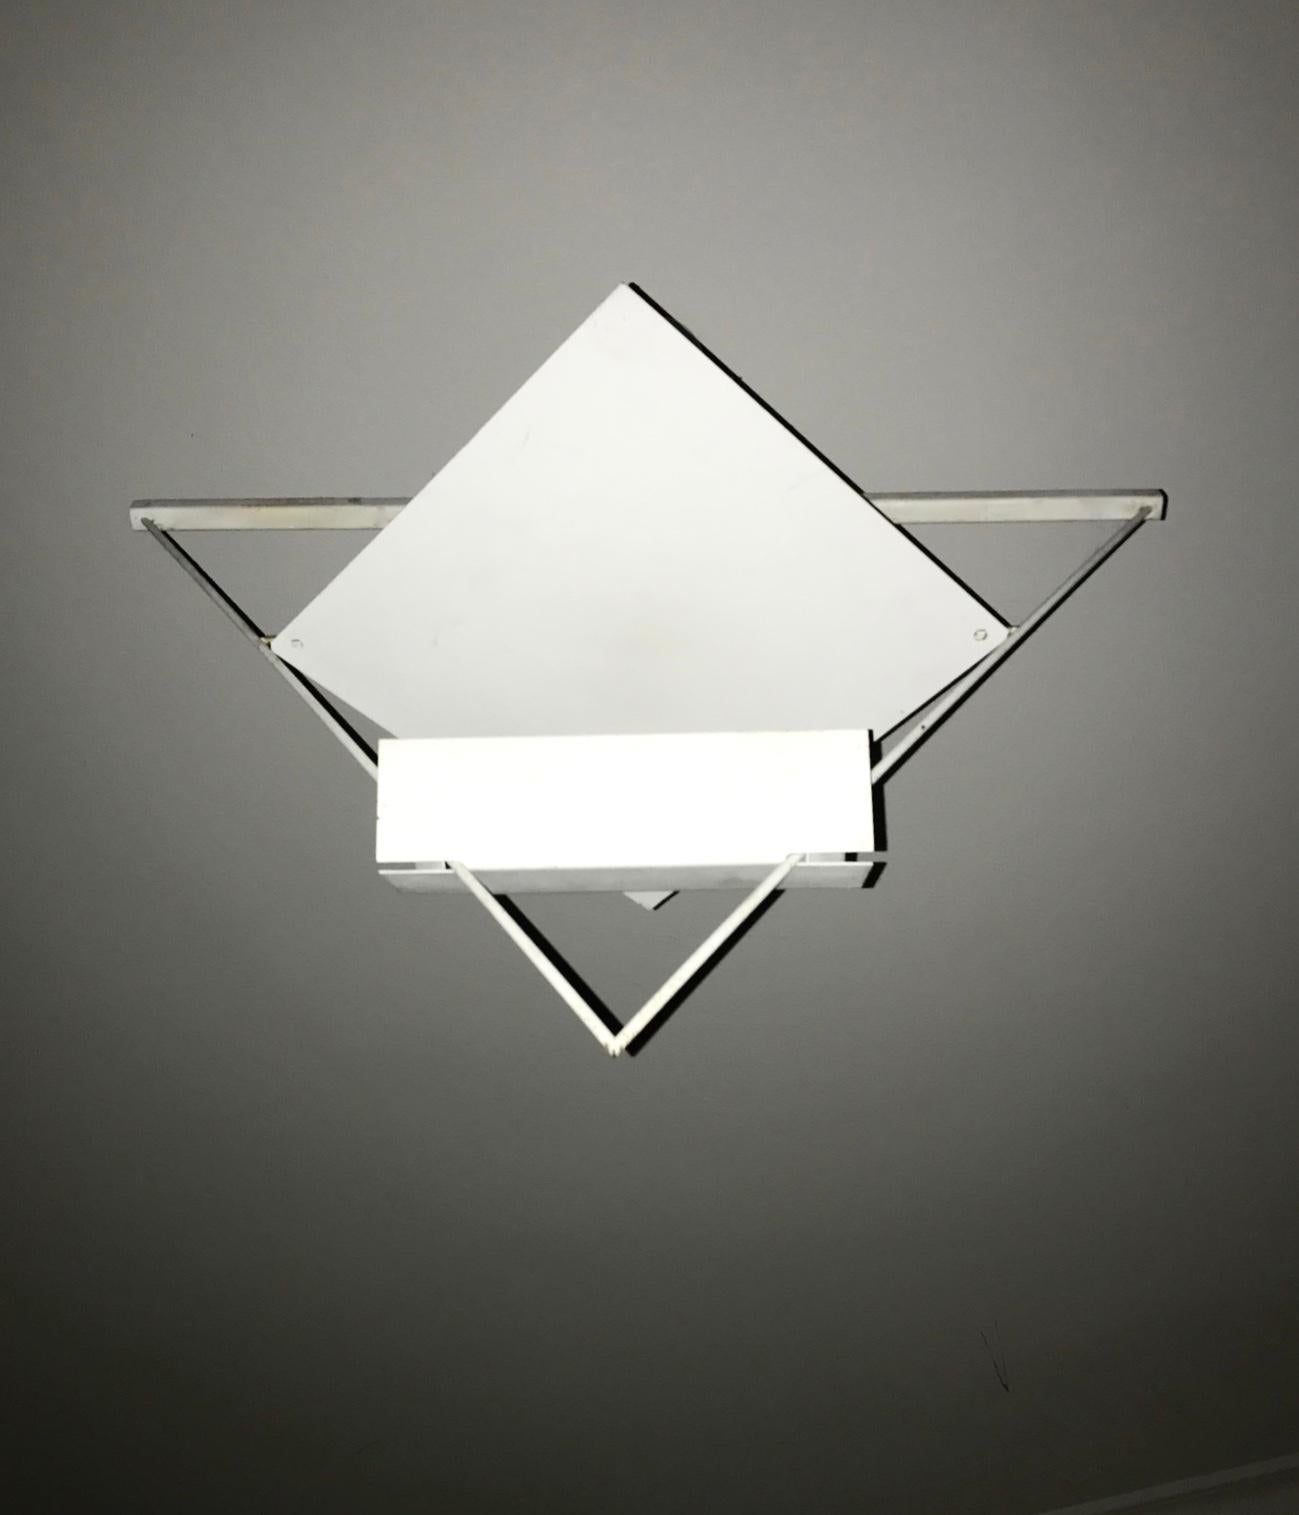 Two pendant by Mario Botta for Artemide
One in white the other in black
Triangular pendant by Mario Botta for Artemide. Designed and manufactured in Italy, circa 1980s. Enameled metal triangular shaped structure which houses a singular halogen